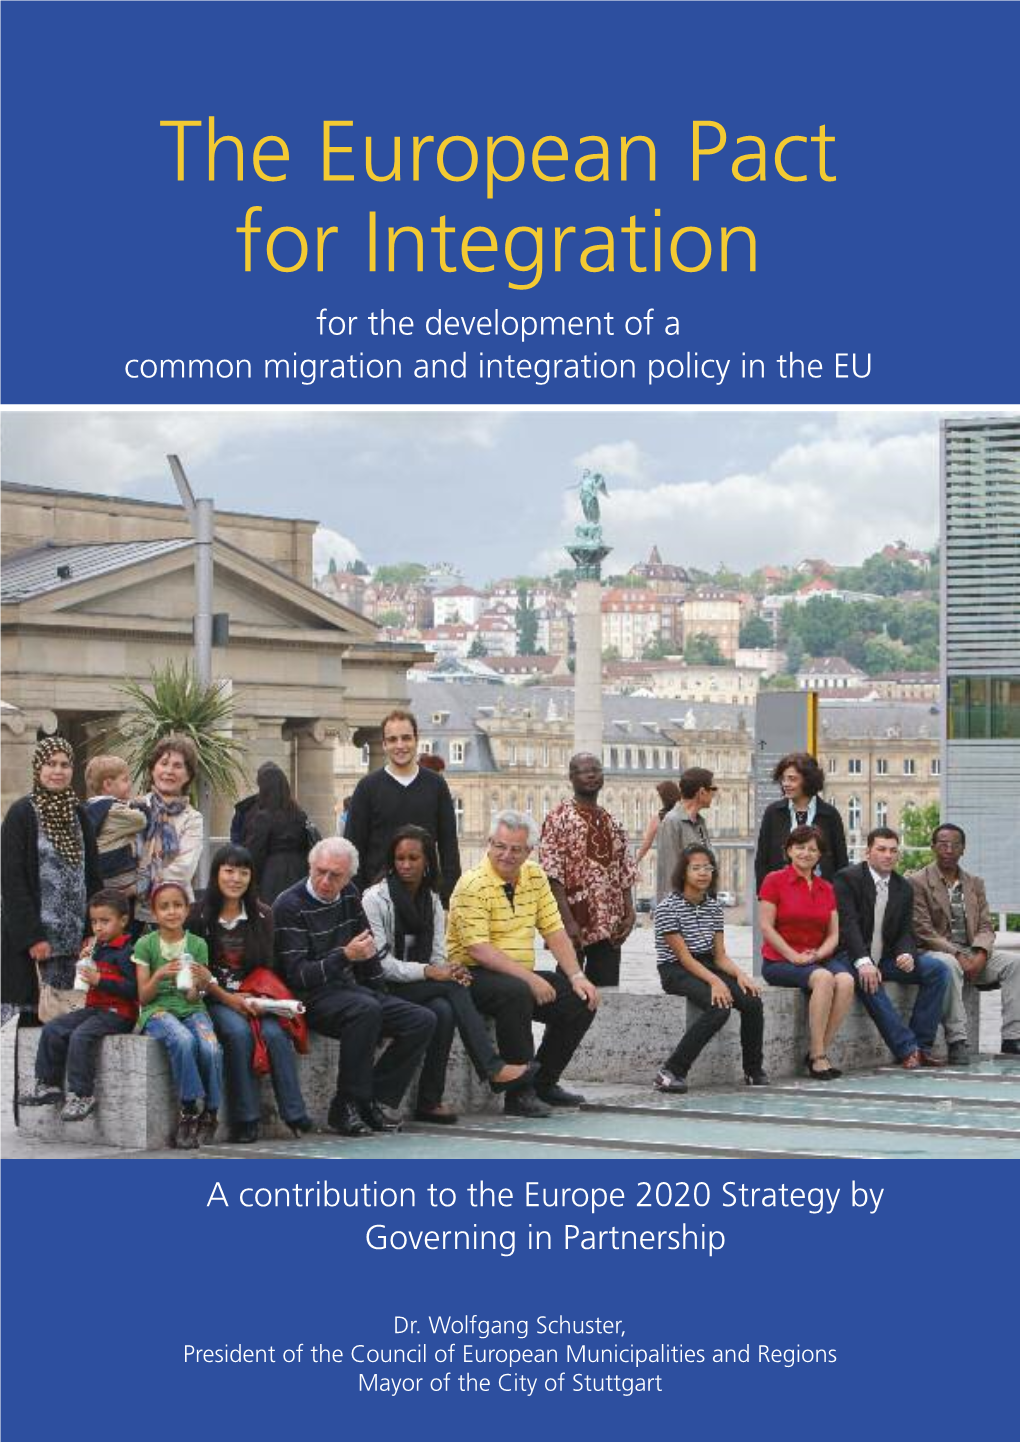 The European Pact for Integration for the Development of a Common Migration and Integration Policy in the EU